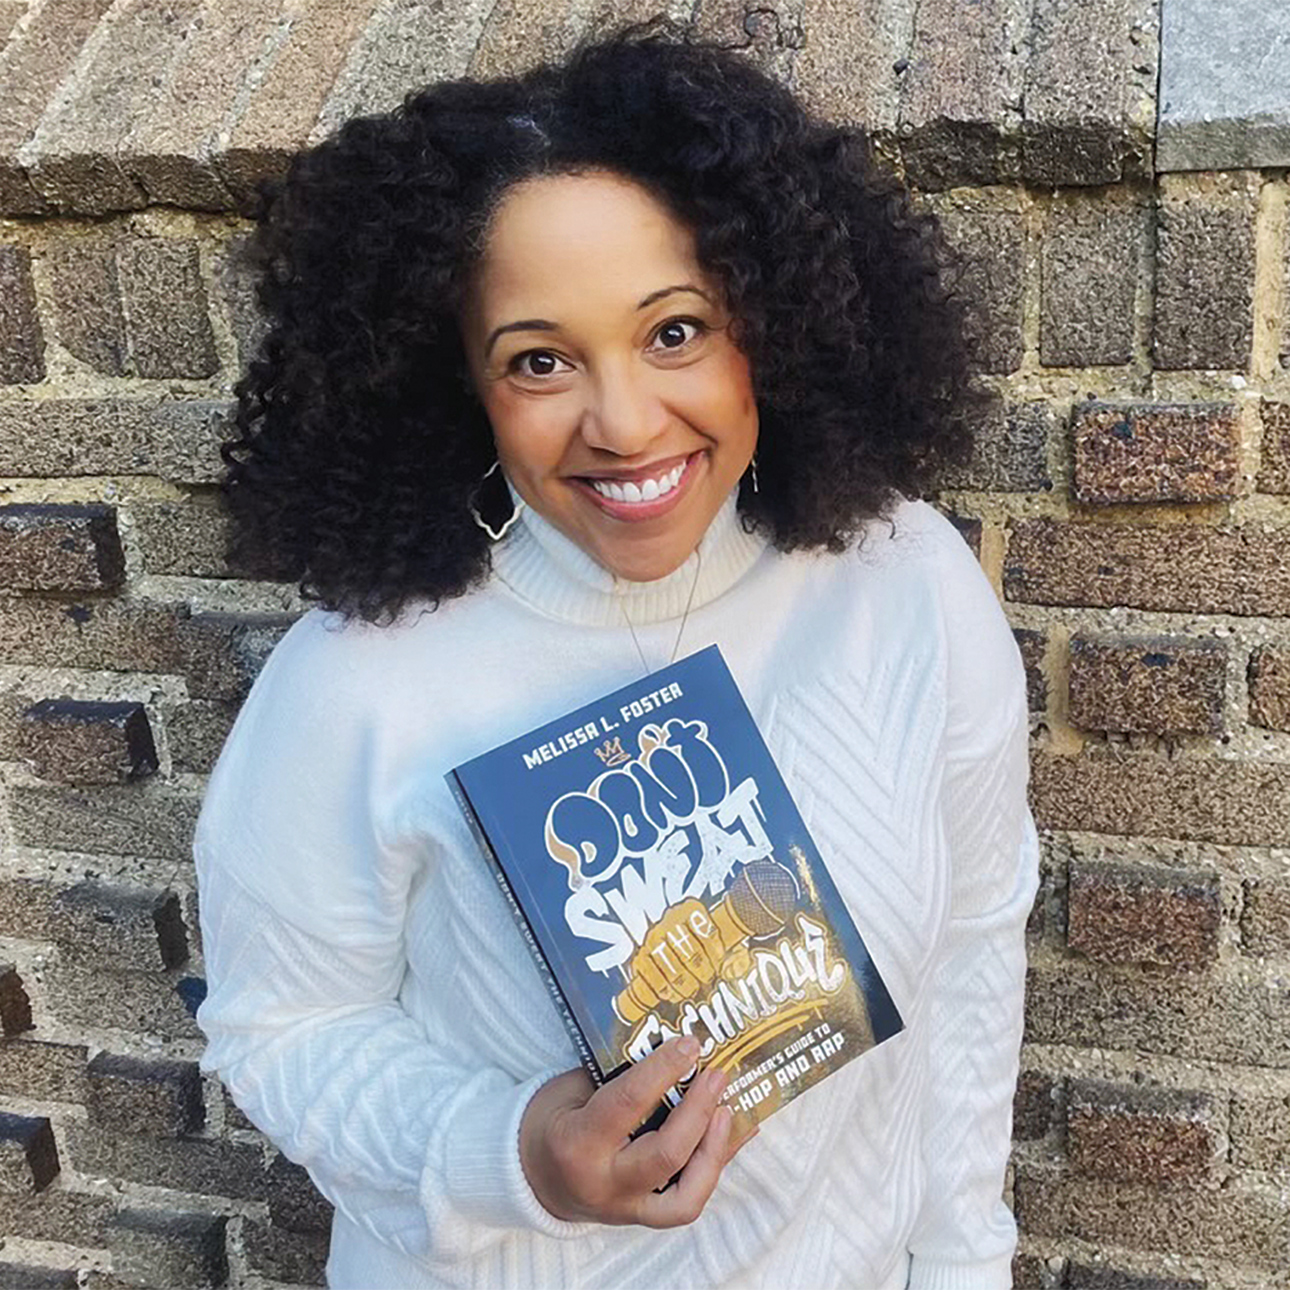 Michelle Foster leans against a brick wall, wearing a white turtleneck top, oblong hoop earrings and a necklace. She is smiling and holding a copy of her book.